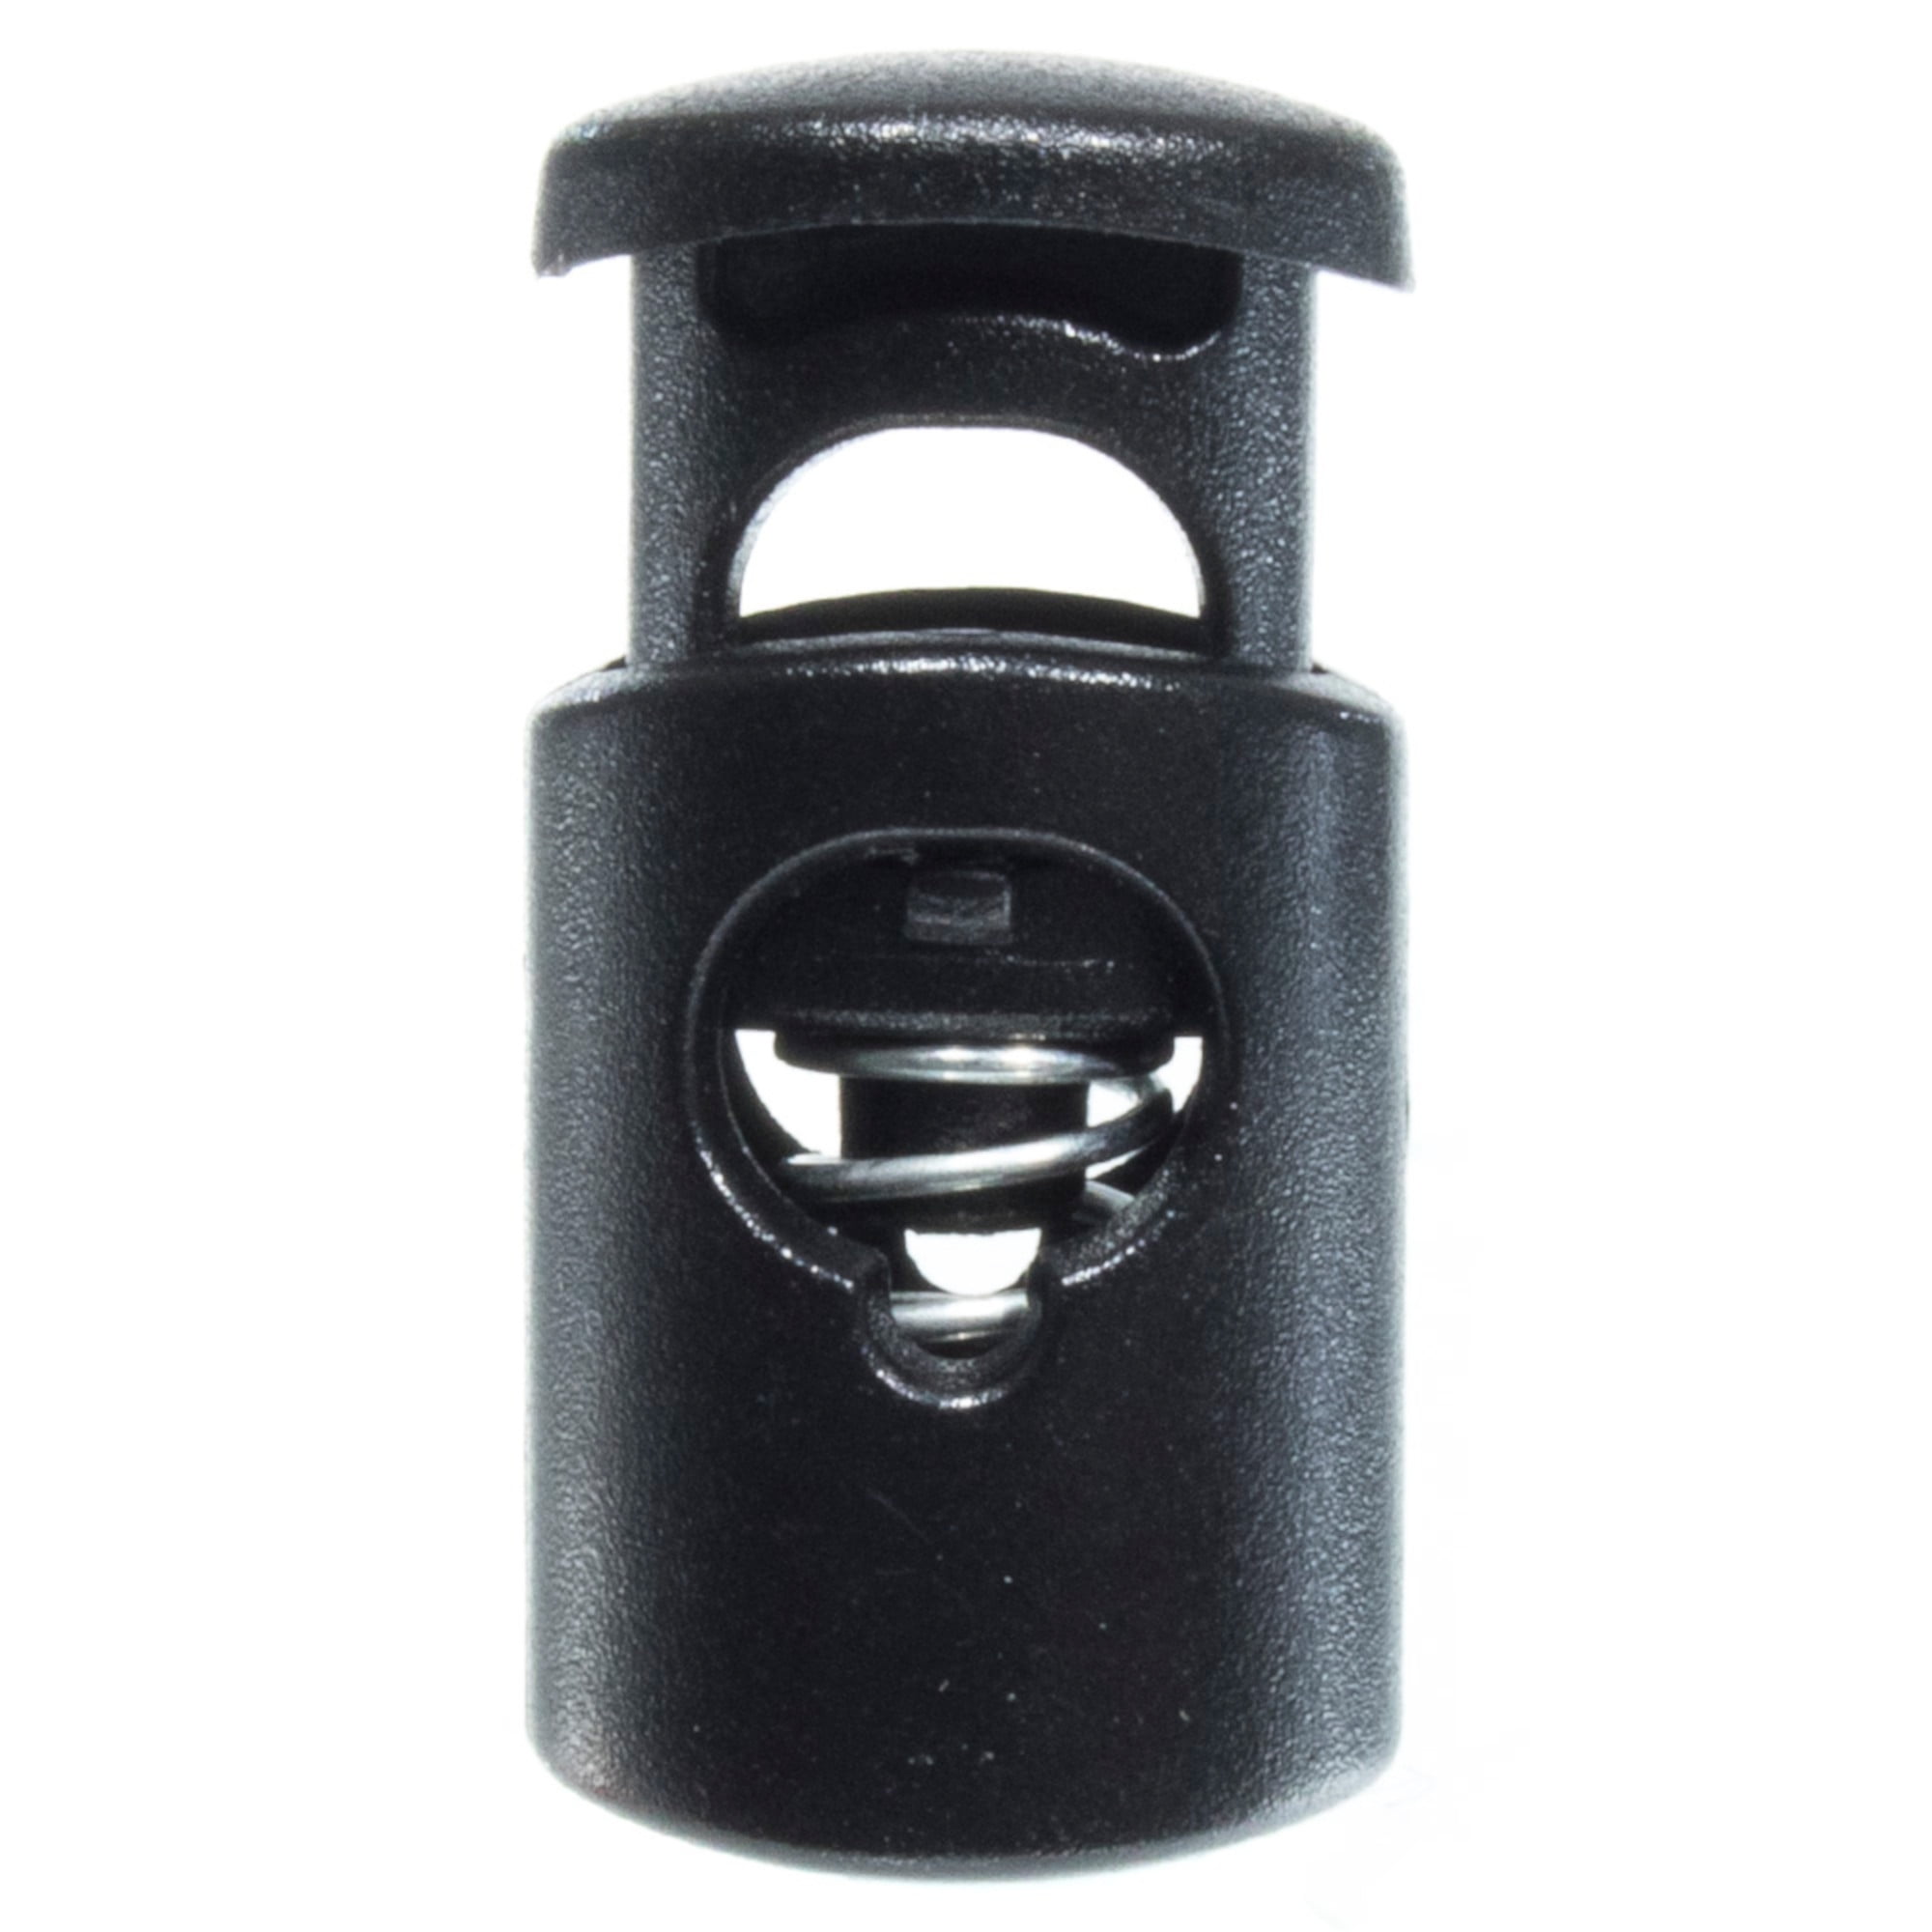 SHOCK CORD DOUBLE HOLE STOPPER LOCK END TOGGLE WITH METAL SPRINGS BUNGEE 4MM 